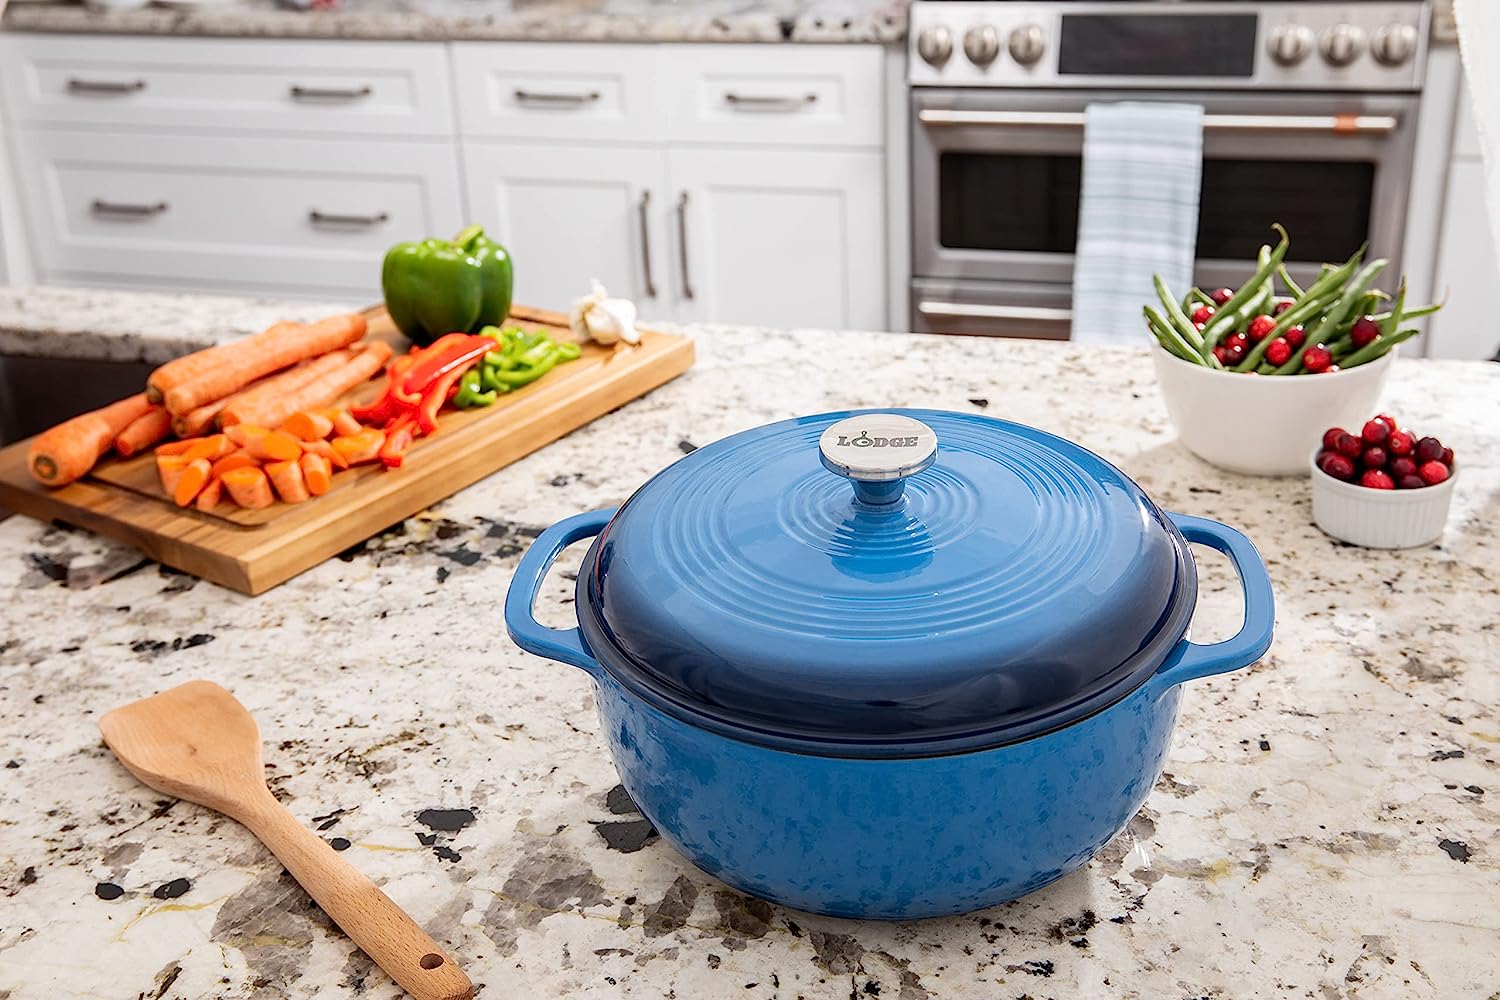 Lodge 6 Quart Enameled Cast Iron Dutch Oven with Lid – Dual Handles – Oven  Safe up to 500° F or on Stovetop - Use to Marinate, Cook, Bake, Refrigerate  and Serve – Blue